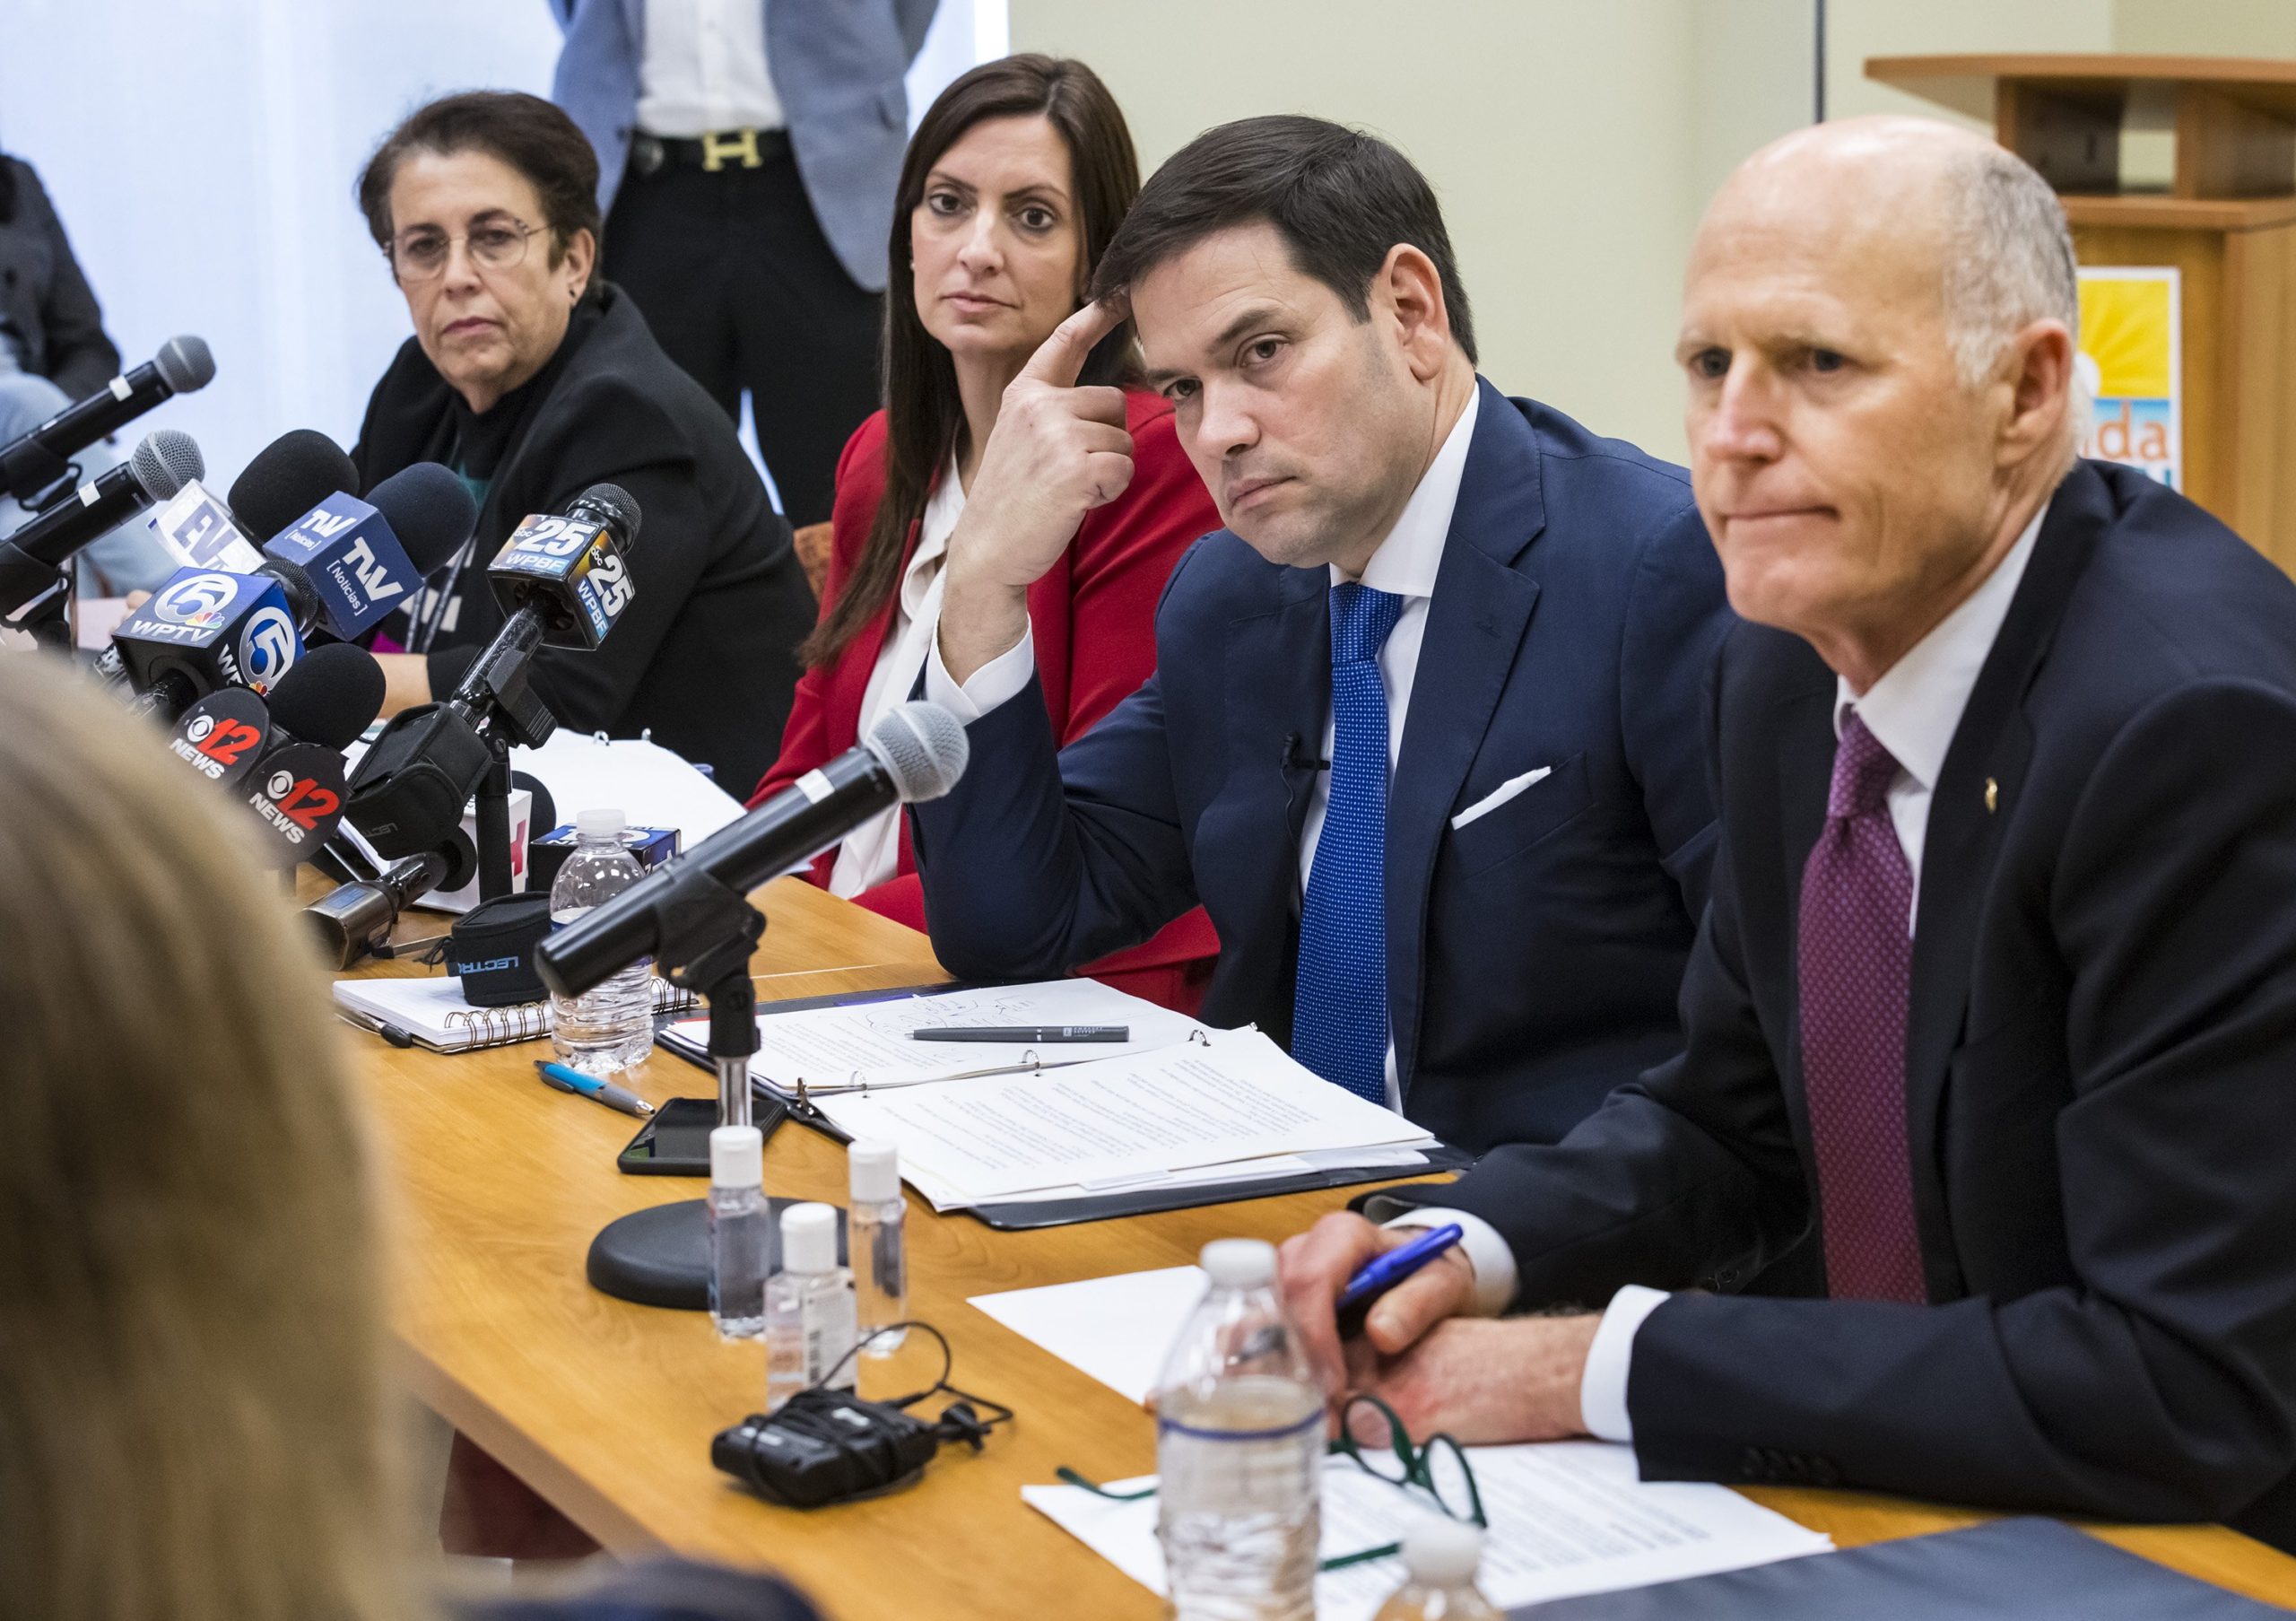 U.S. Sen. Rick Scott, right, speaks with U.S. Sen. Marco Rubio and health officials on March 6, 2020, at the Palm Beach County Health Department in West Palm Beach. As governor, Scott oversaw massive cuts in the state's health department.